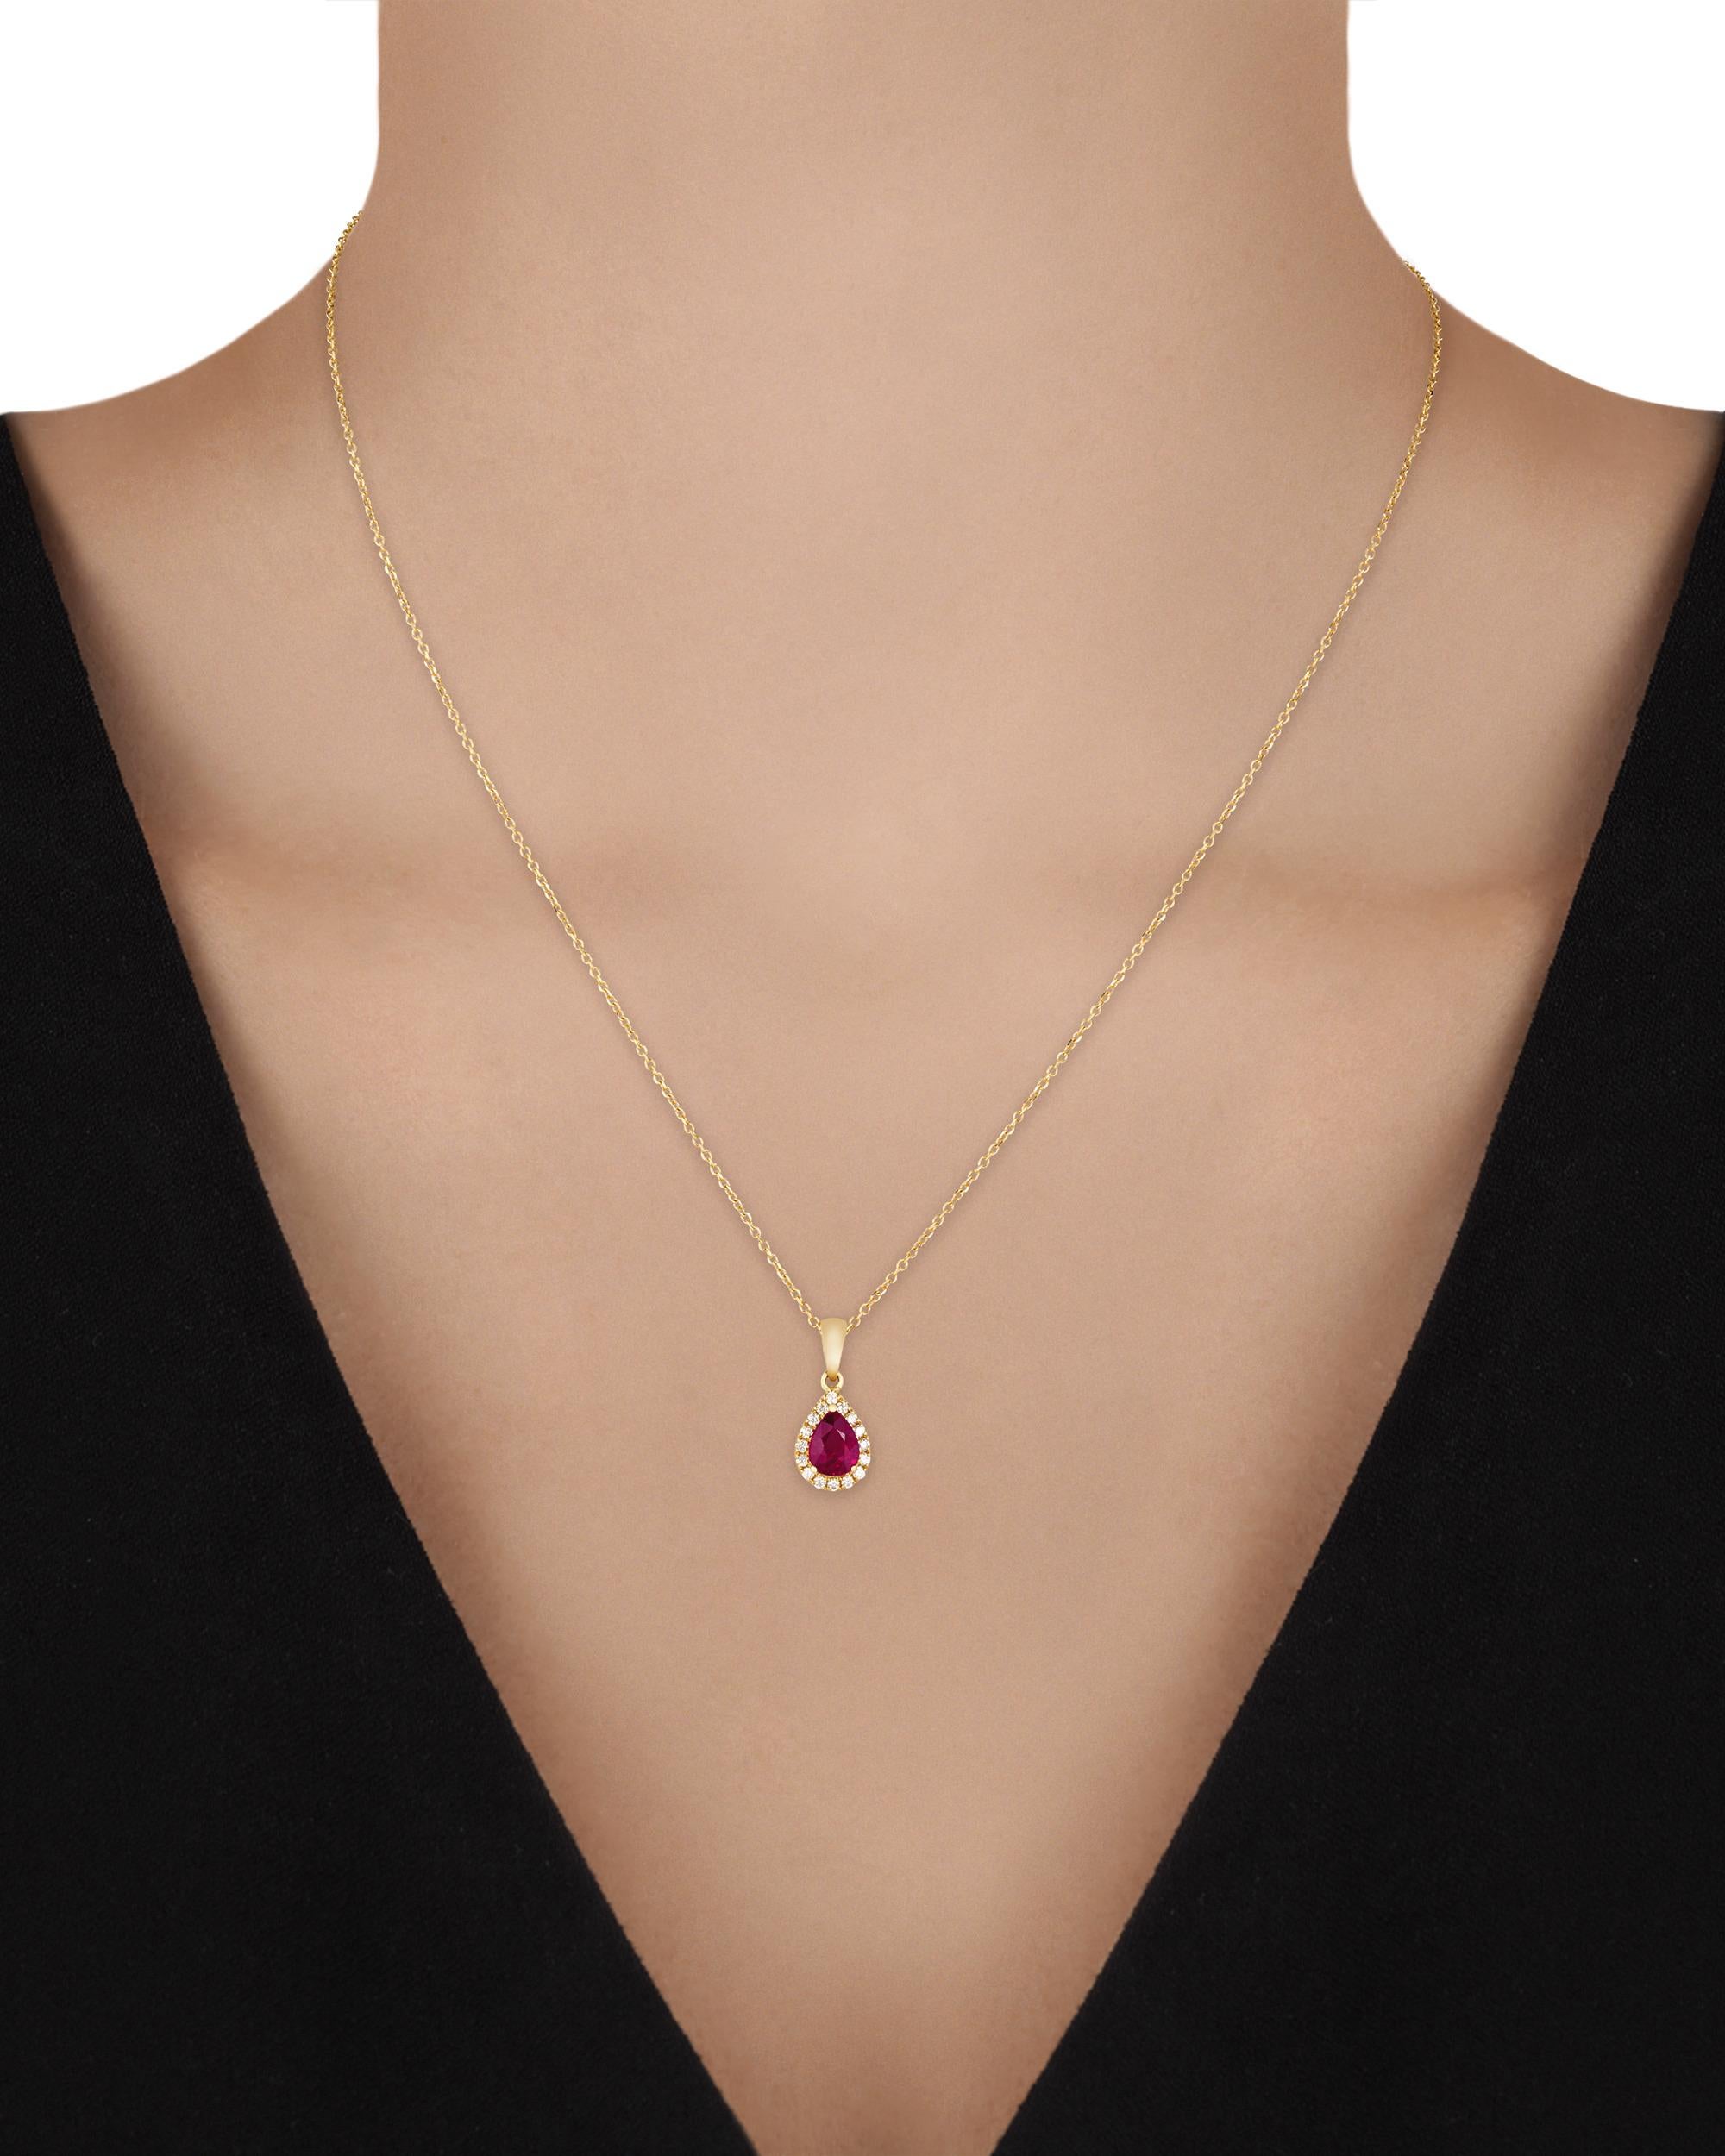 Displaying a desirable deep red hue, the central ruby in this elegant pendant necklace weighs 1.03 carats. Accented by diamonds totaling 0.15 carats. Set in 18K yellow gold.

Pendant: 3/4